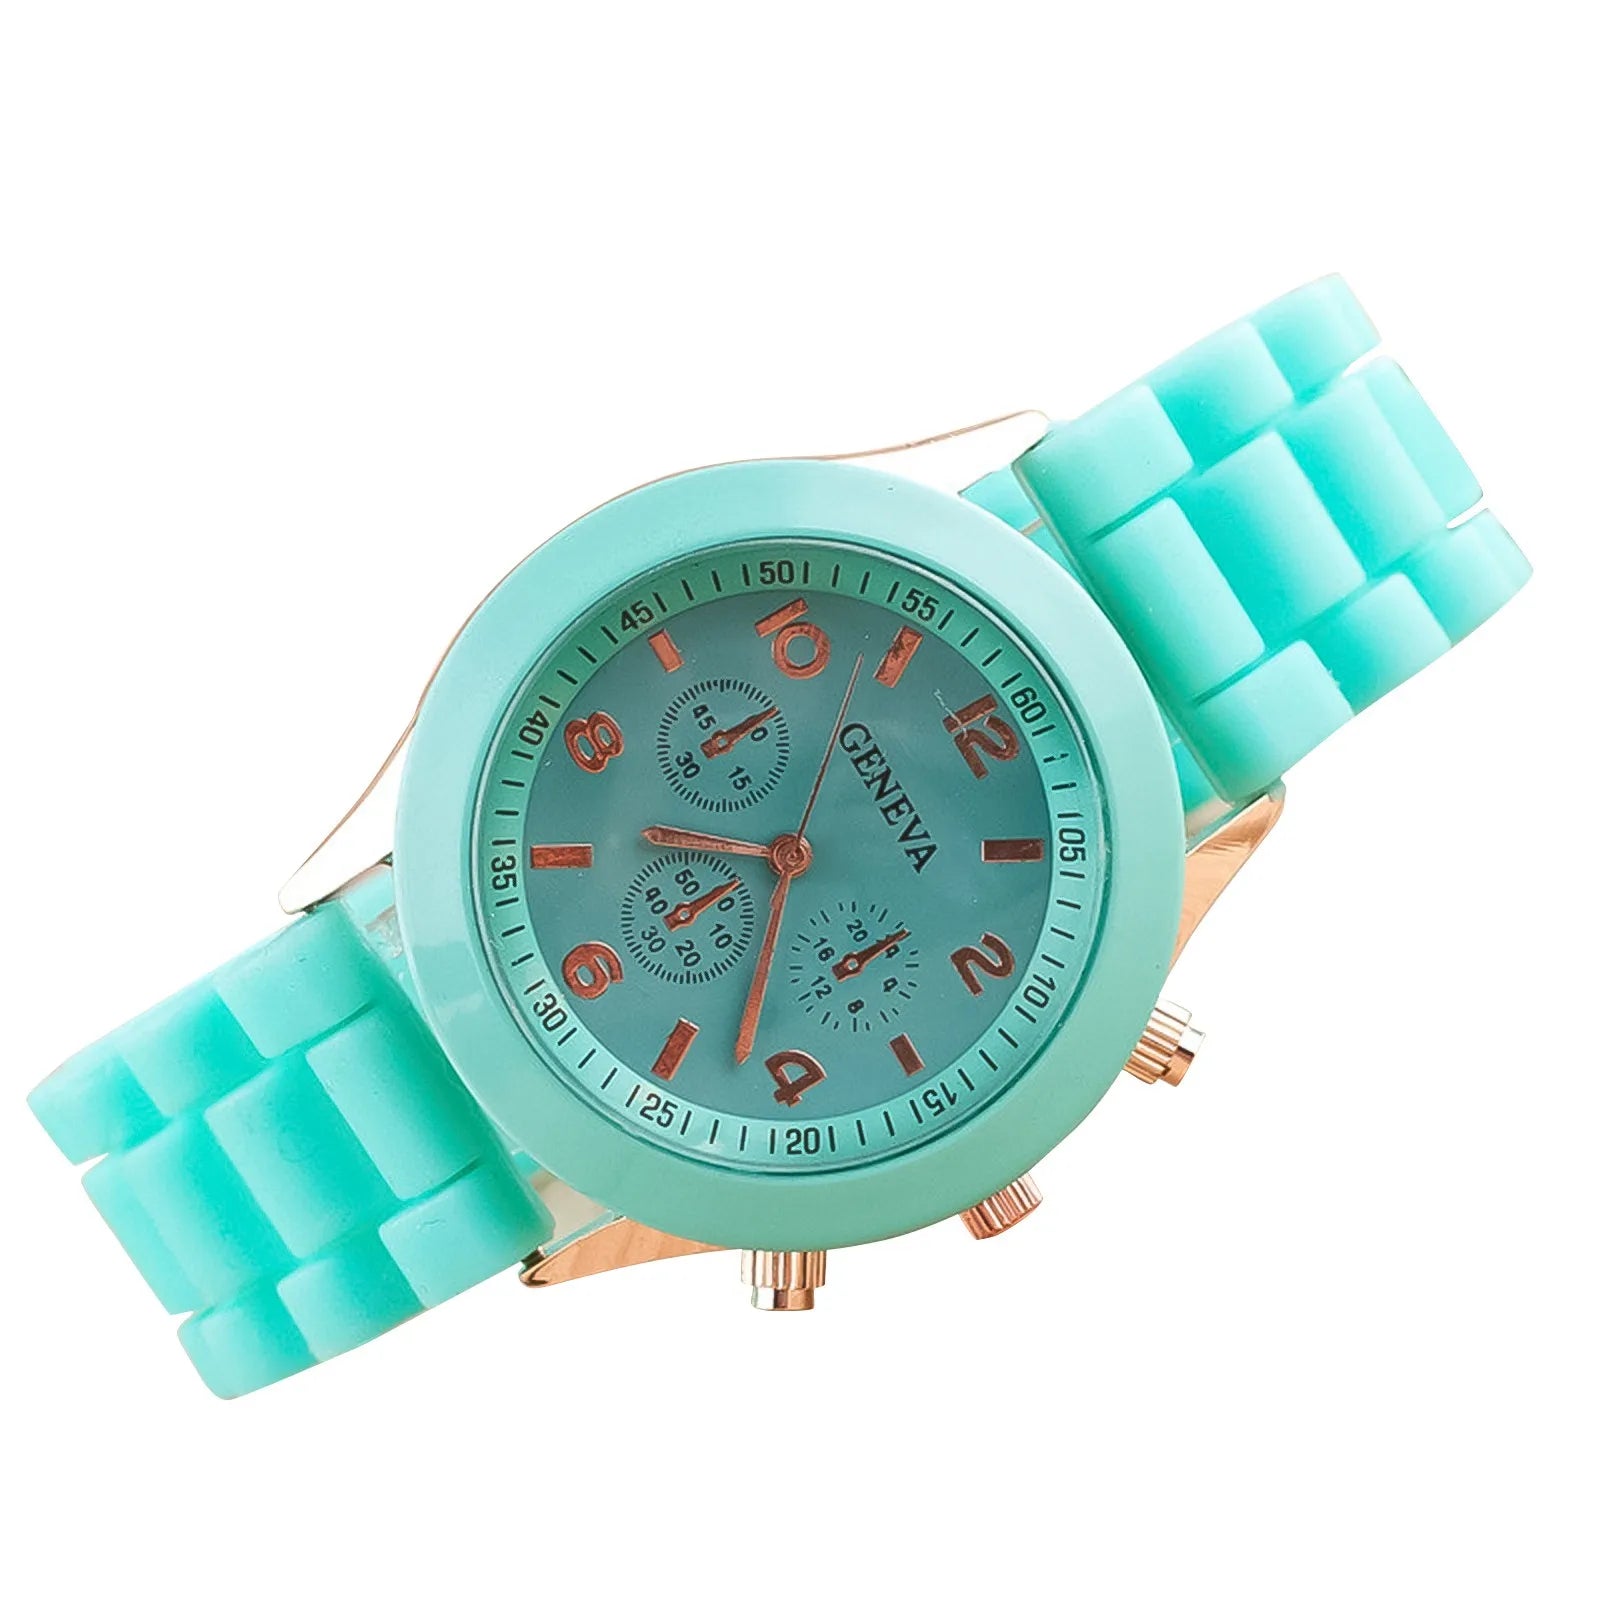 Fashion Women Watches Multi-Color Silicone Quartz Watch Ladies Jelly Color Simple Life Waterproof Wrist Watch Reloj Para Mujer